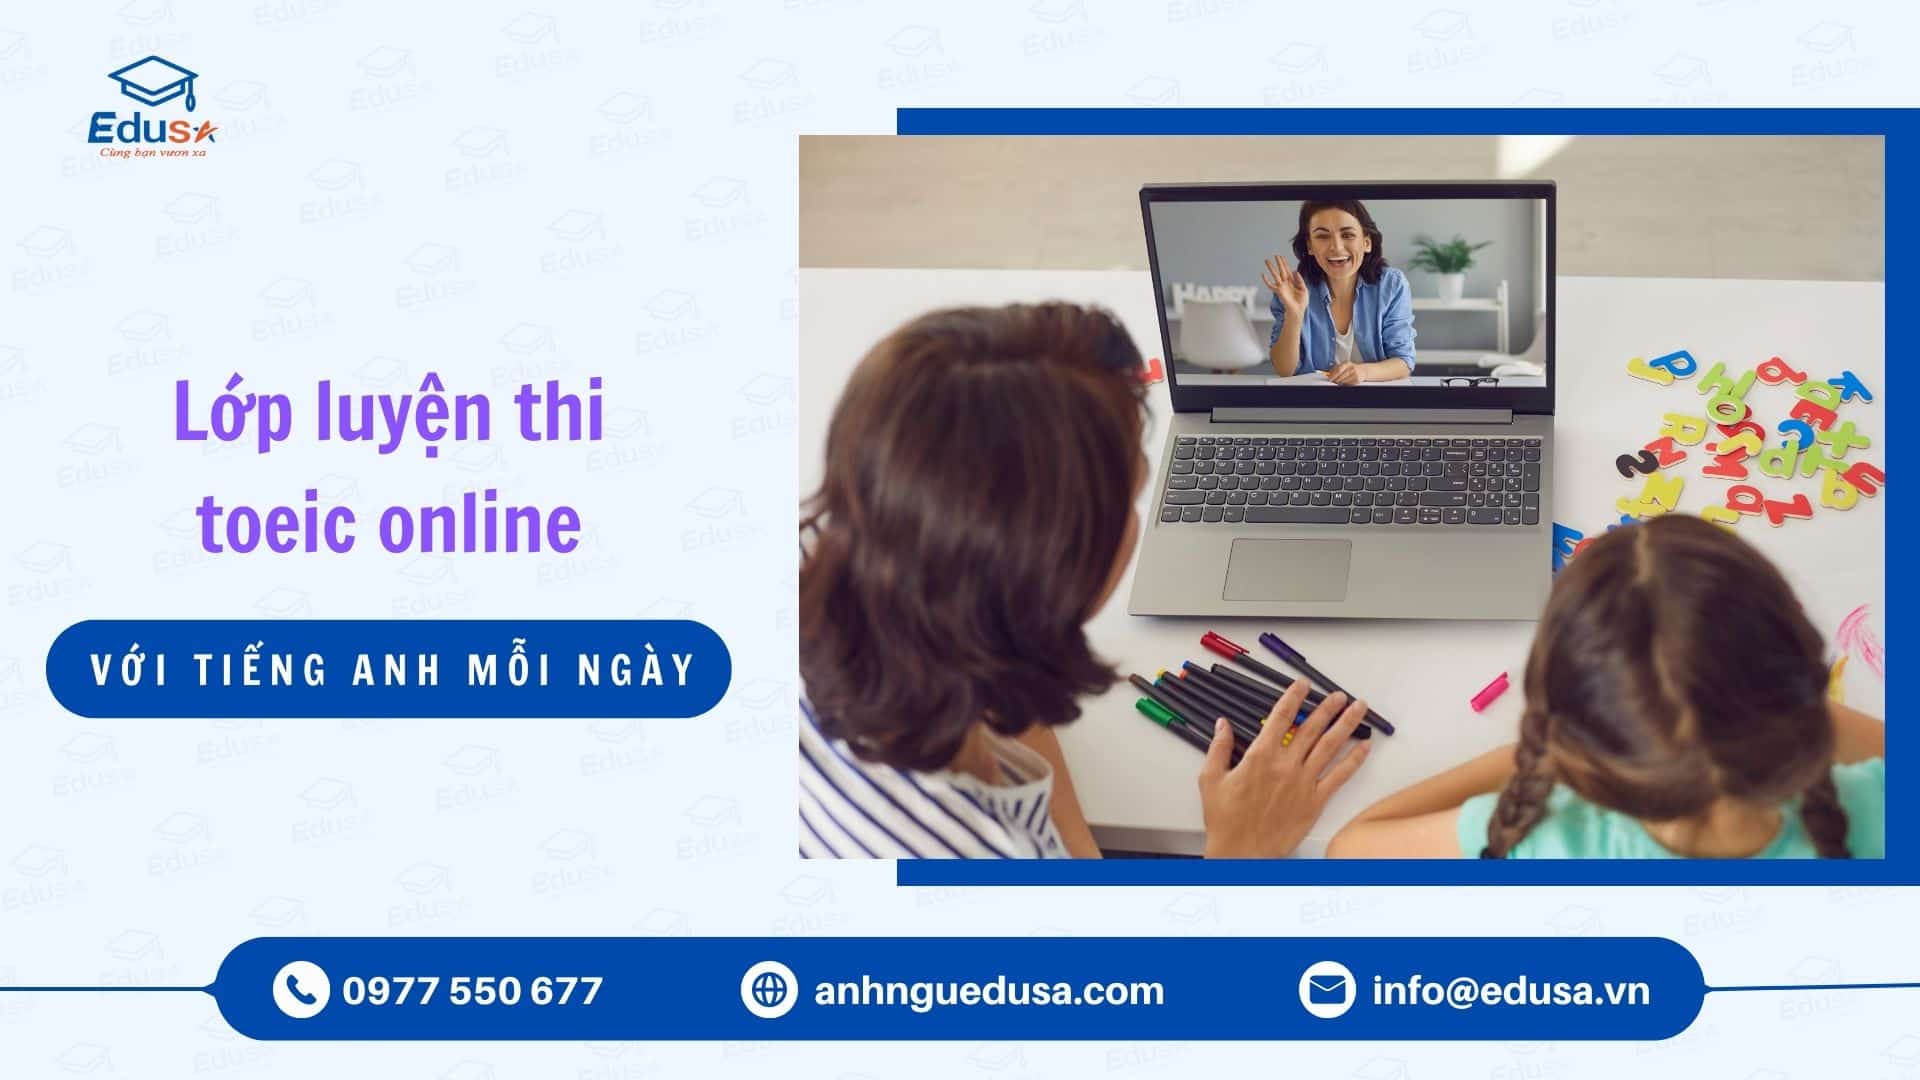 lop-luyen-thi-toeic-online-voi-tieng-anh-moi-ngay